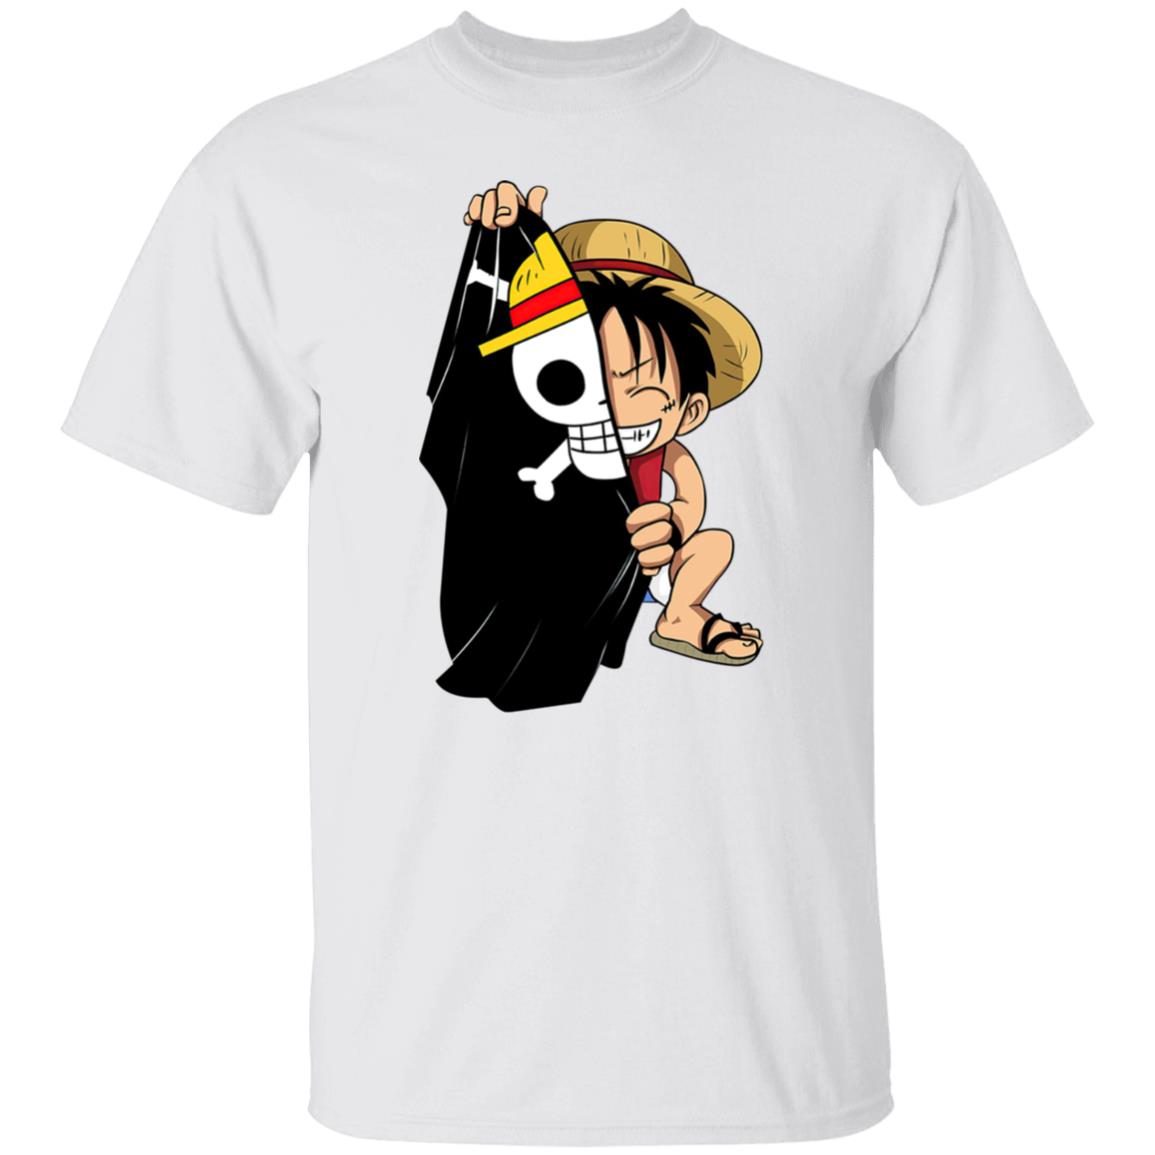 Monkey D. Luffy and One Piece Flag T Shirt - Ghibli Store